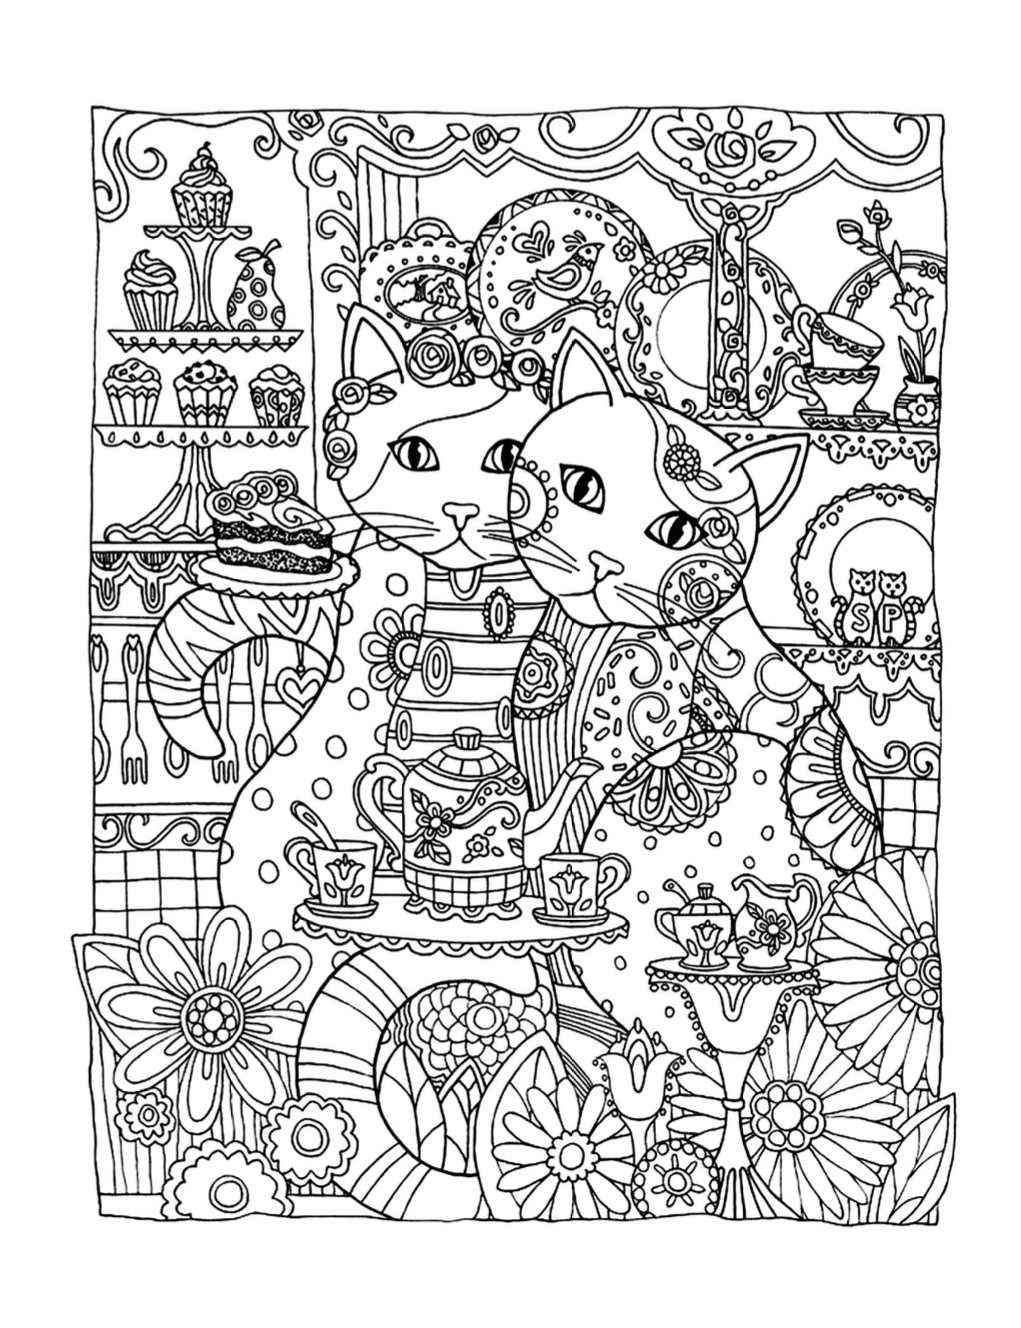 Two Cats Coloring Page | Free Download